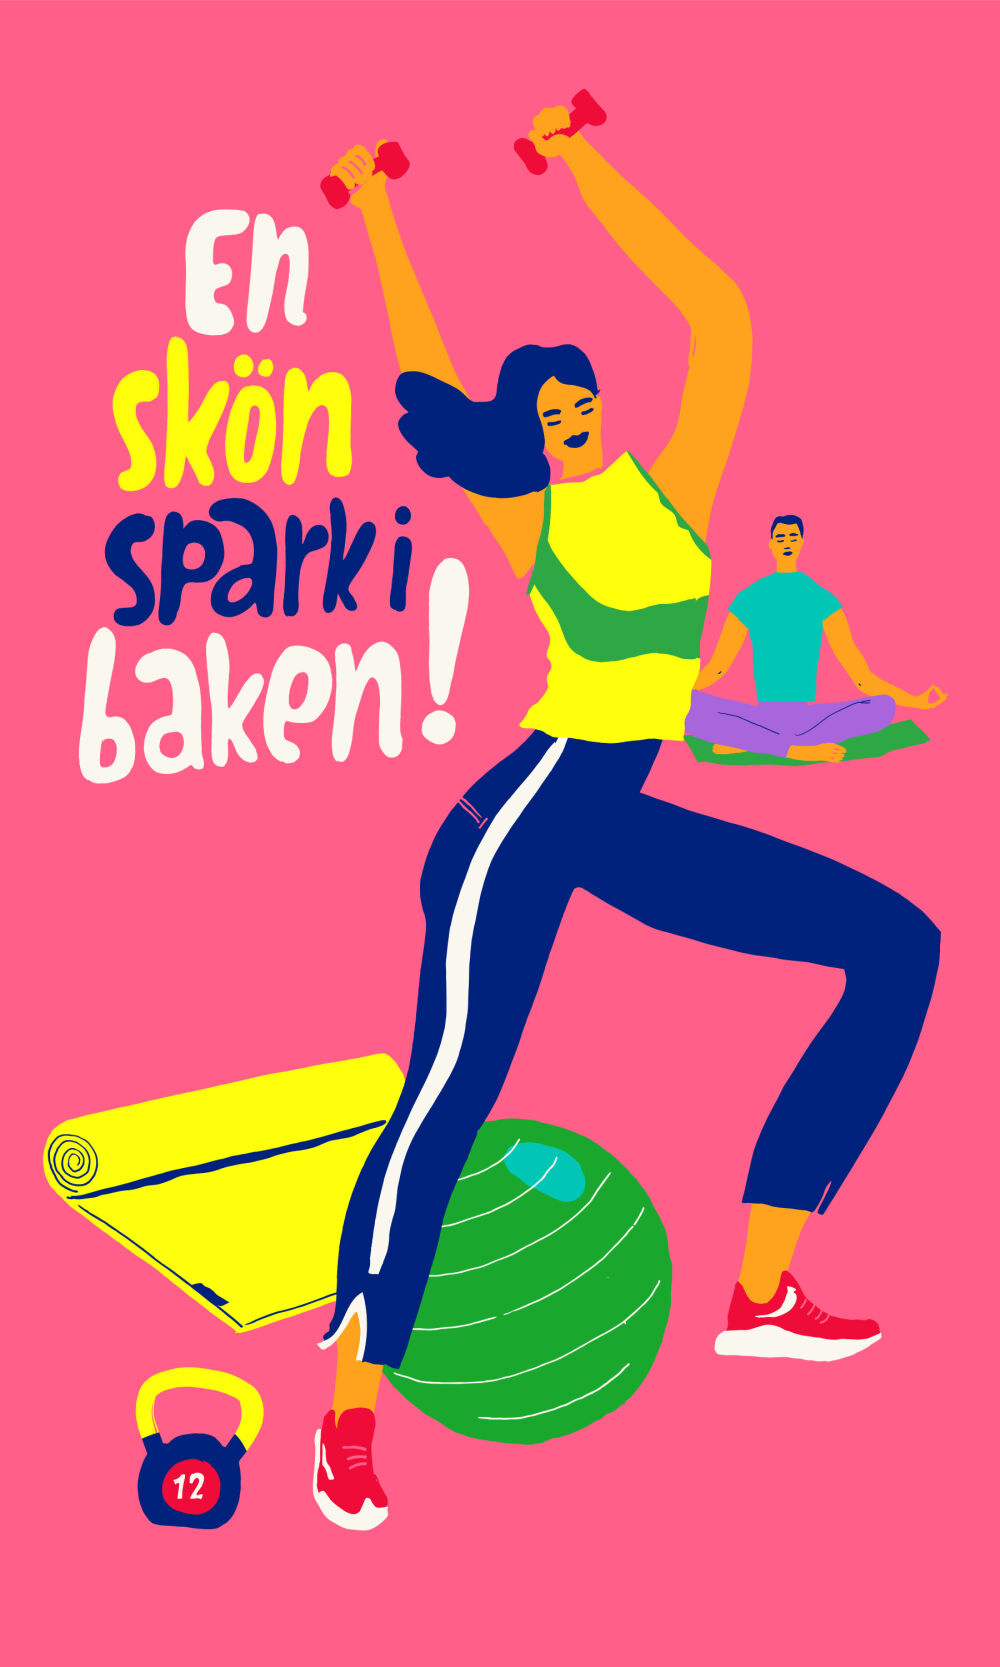 Illustratied advertising campaign for Stockholmsmässan by Erica Jacobson